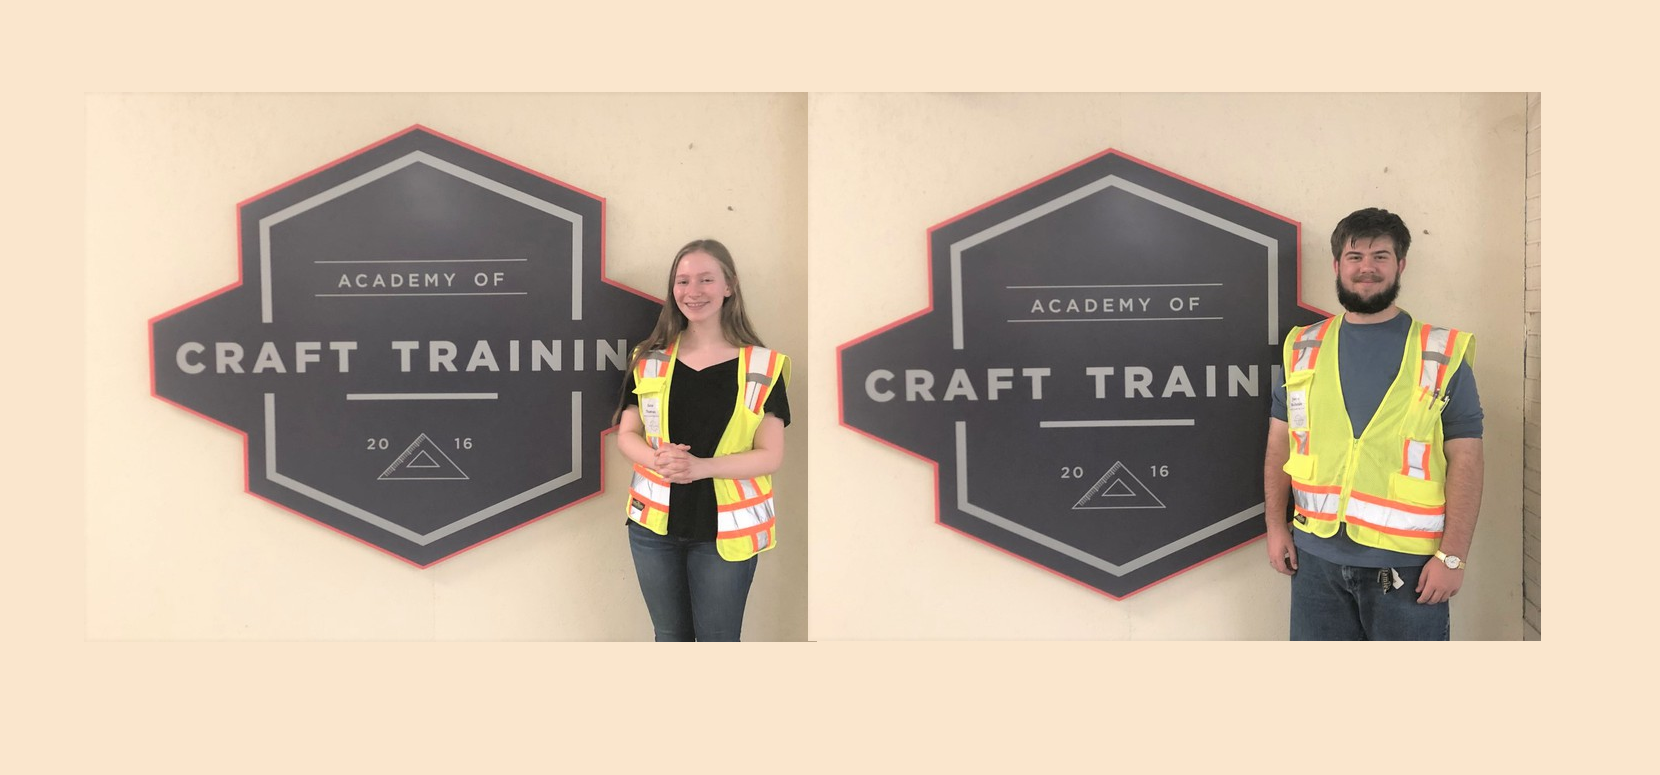 Hewitt-Trussville students named Employees of the Month at Academy of Craft Training